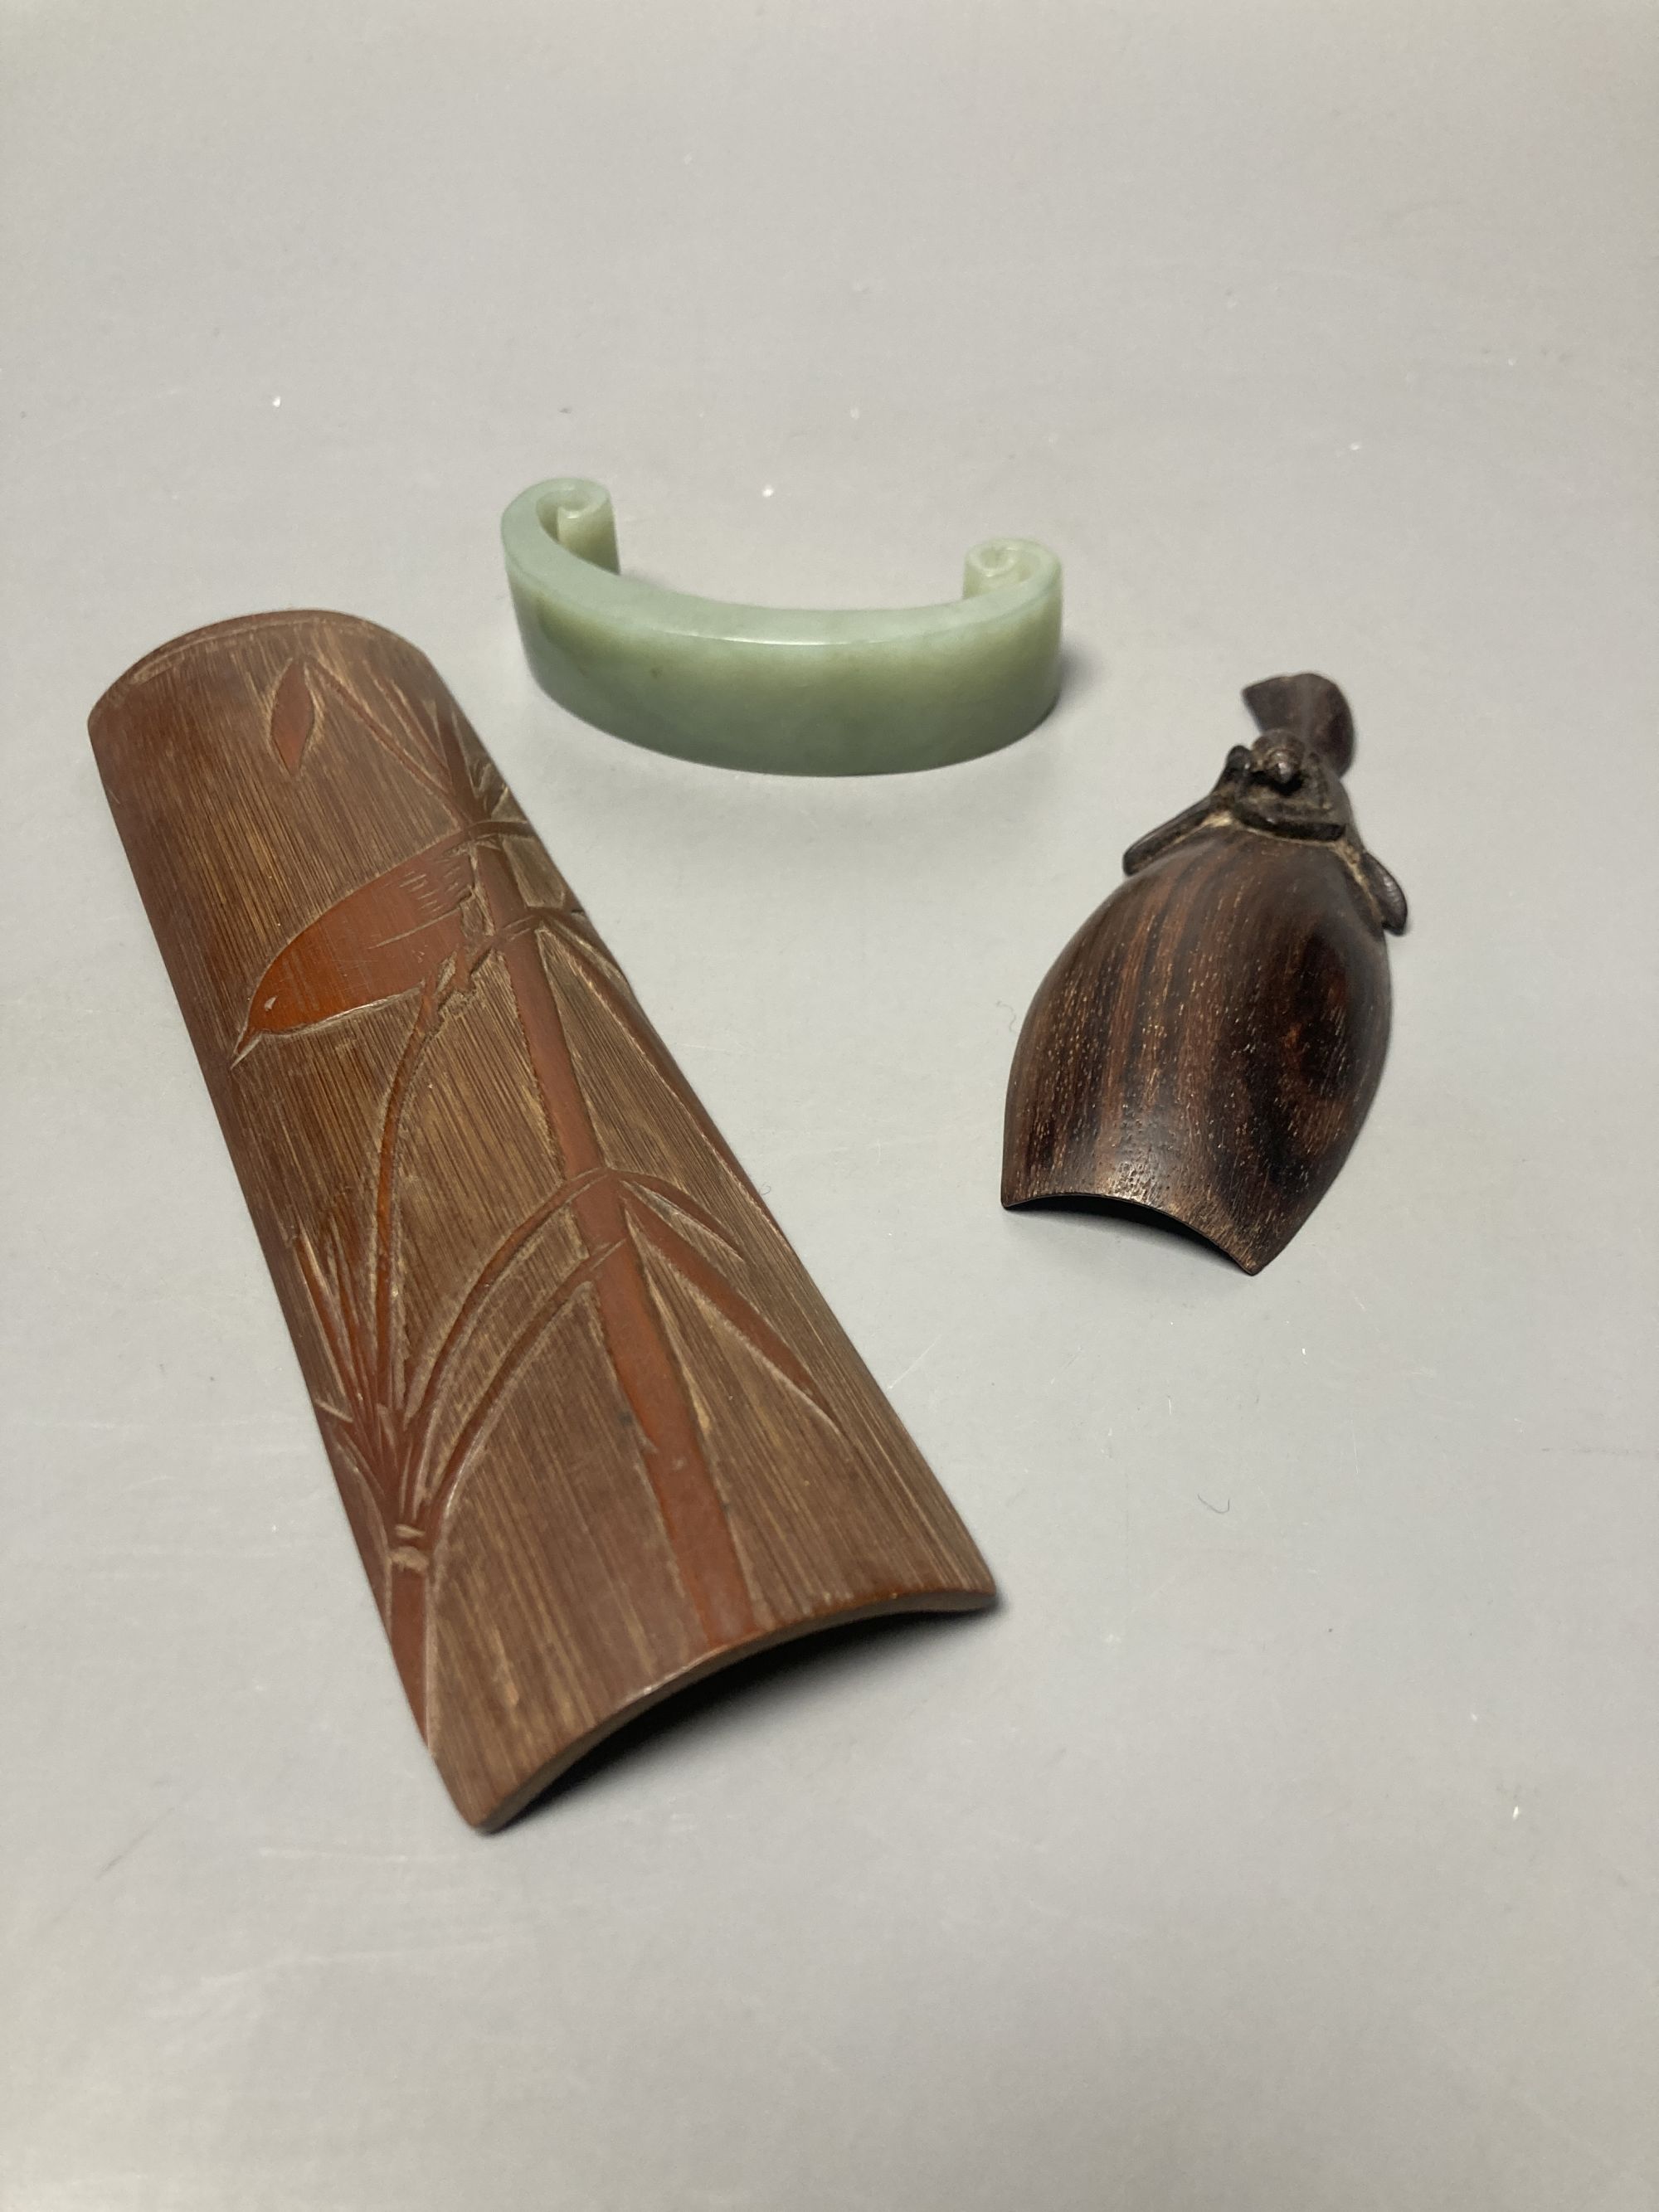 A Japanese bamboo wrist wrest, a Chinese jadeite, bamboo scoop and wooden carving possibly Zitan,